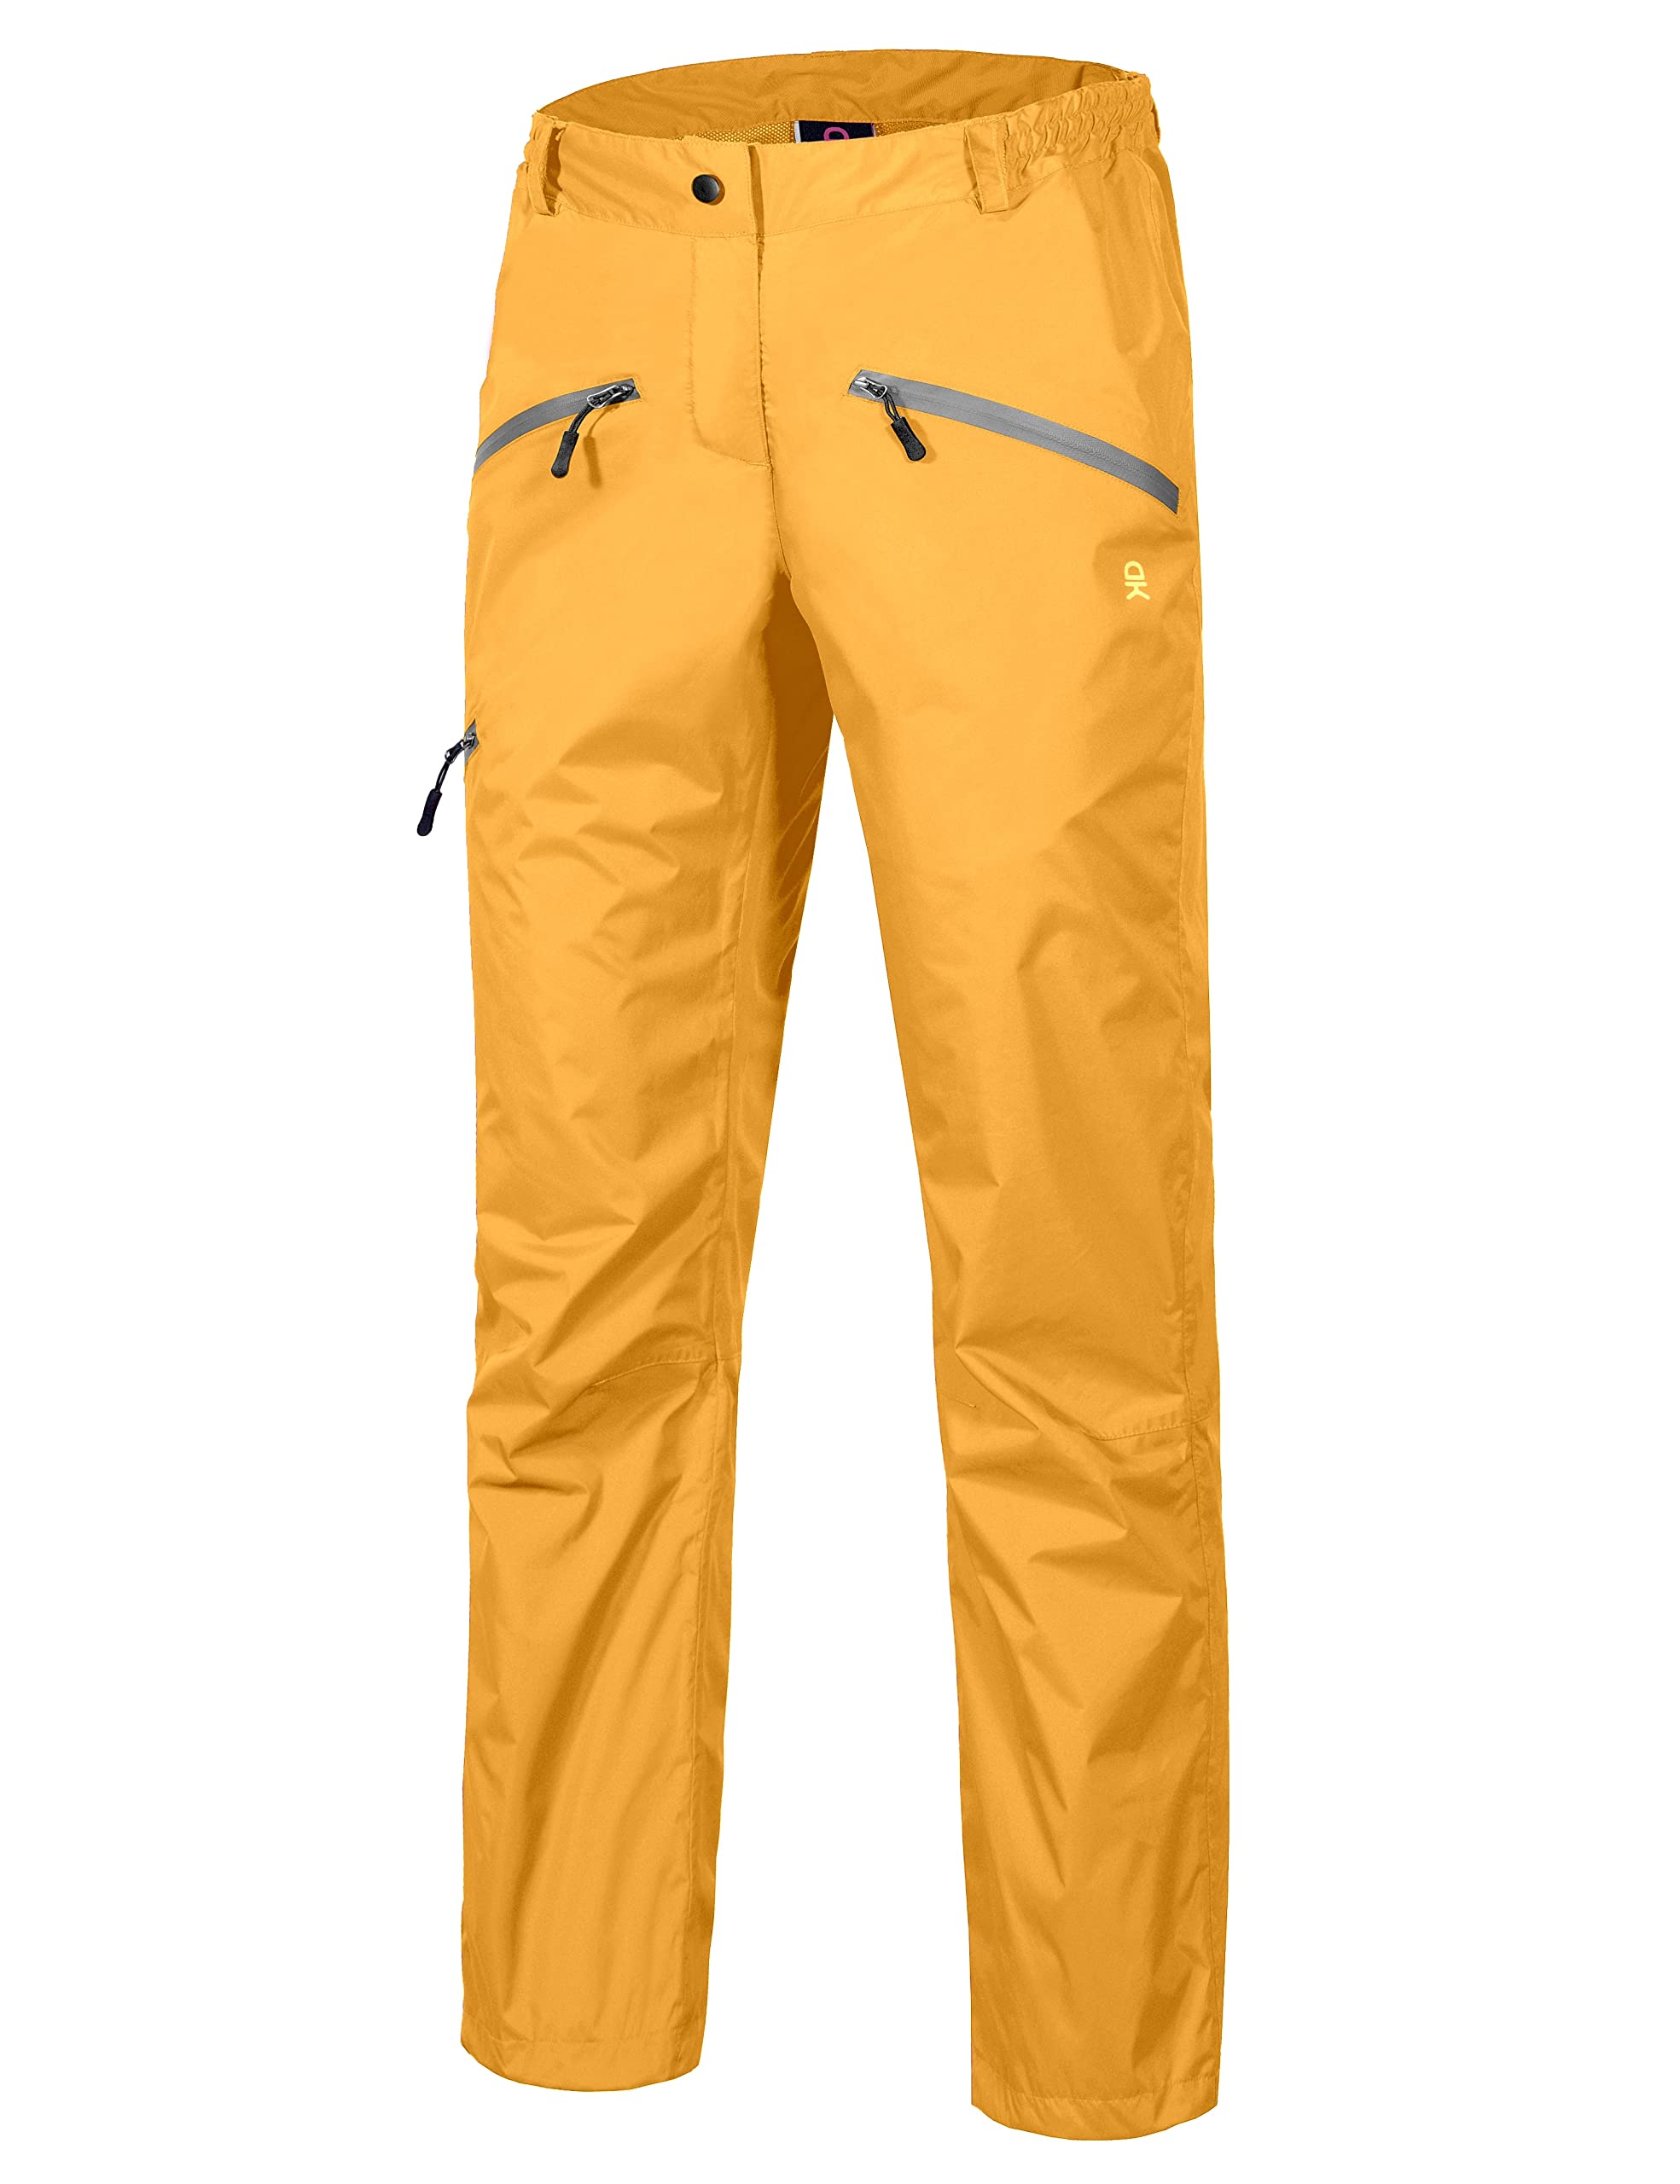 Little Donkey Andy Womens Lightweight Waterproof Rain Pants Breathable Hiking Pants for Outdoor Fishing golden XL